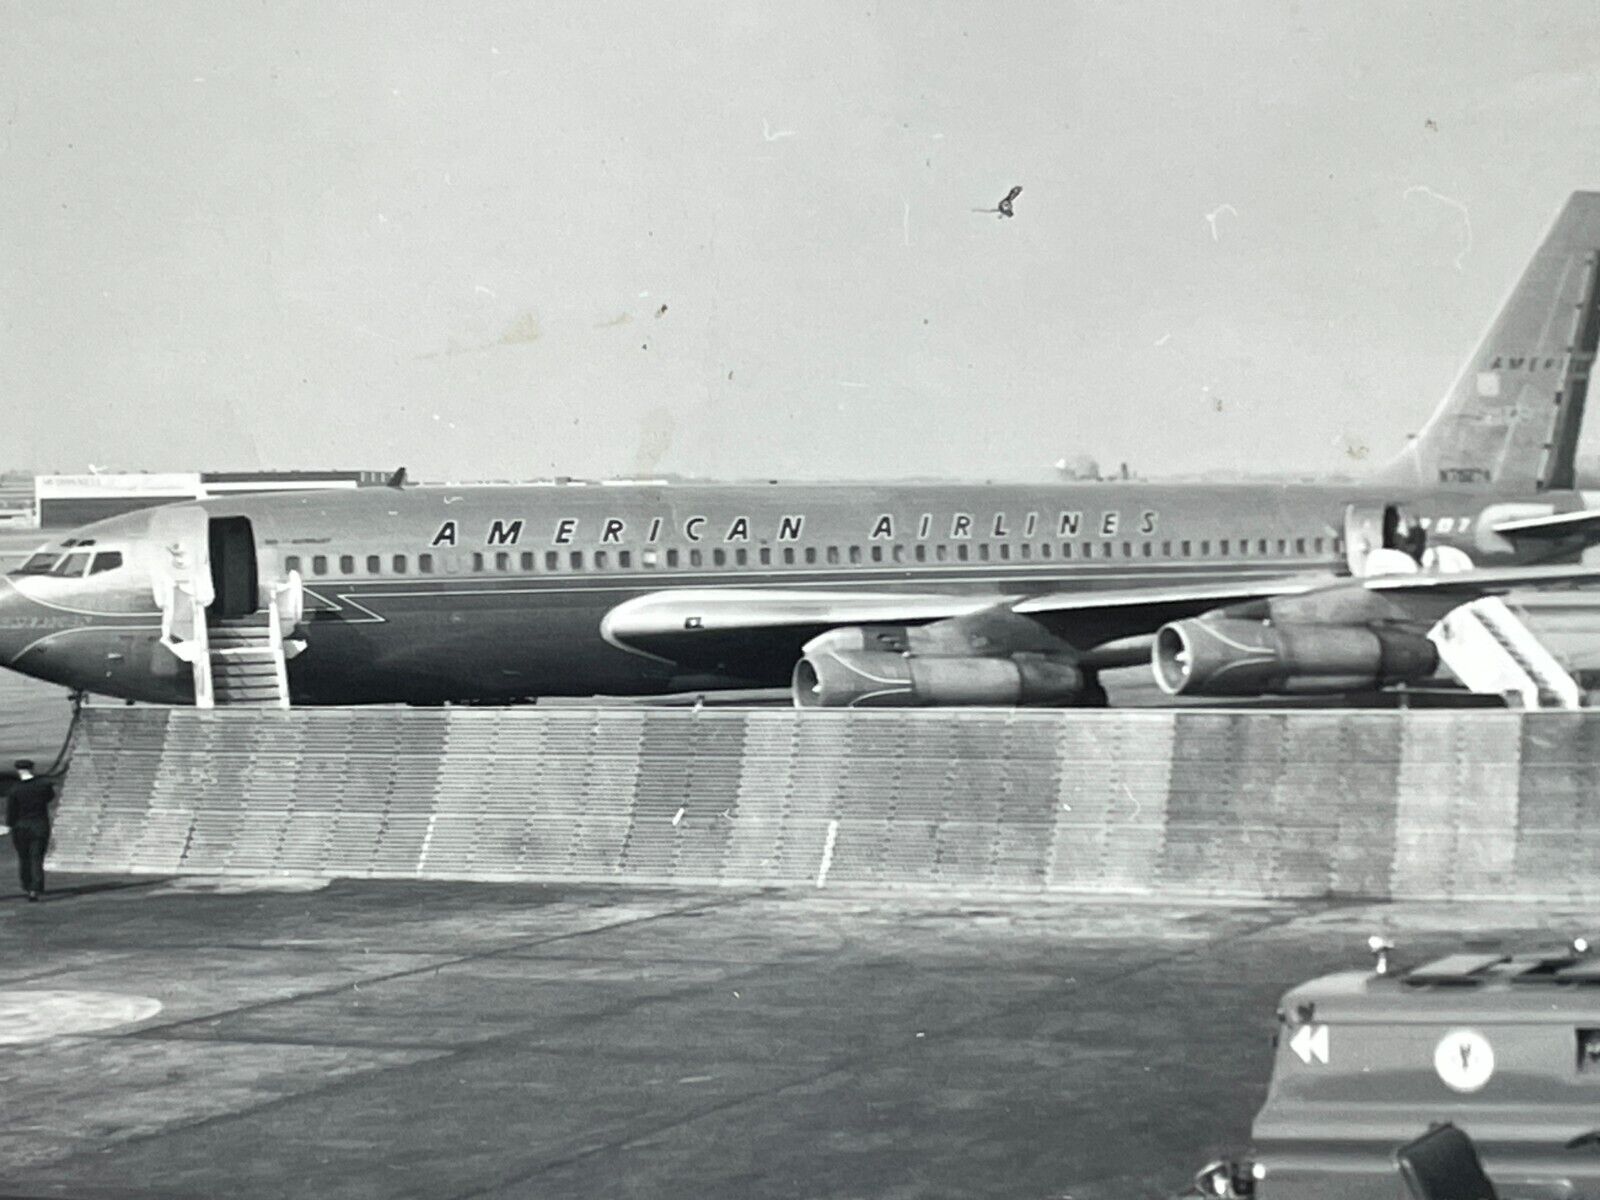 W3 Photograph 1963 American Airlines Airplane In Terminal Aviation Vehicles 